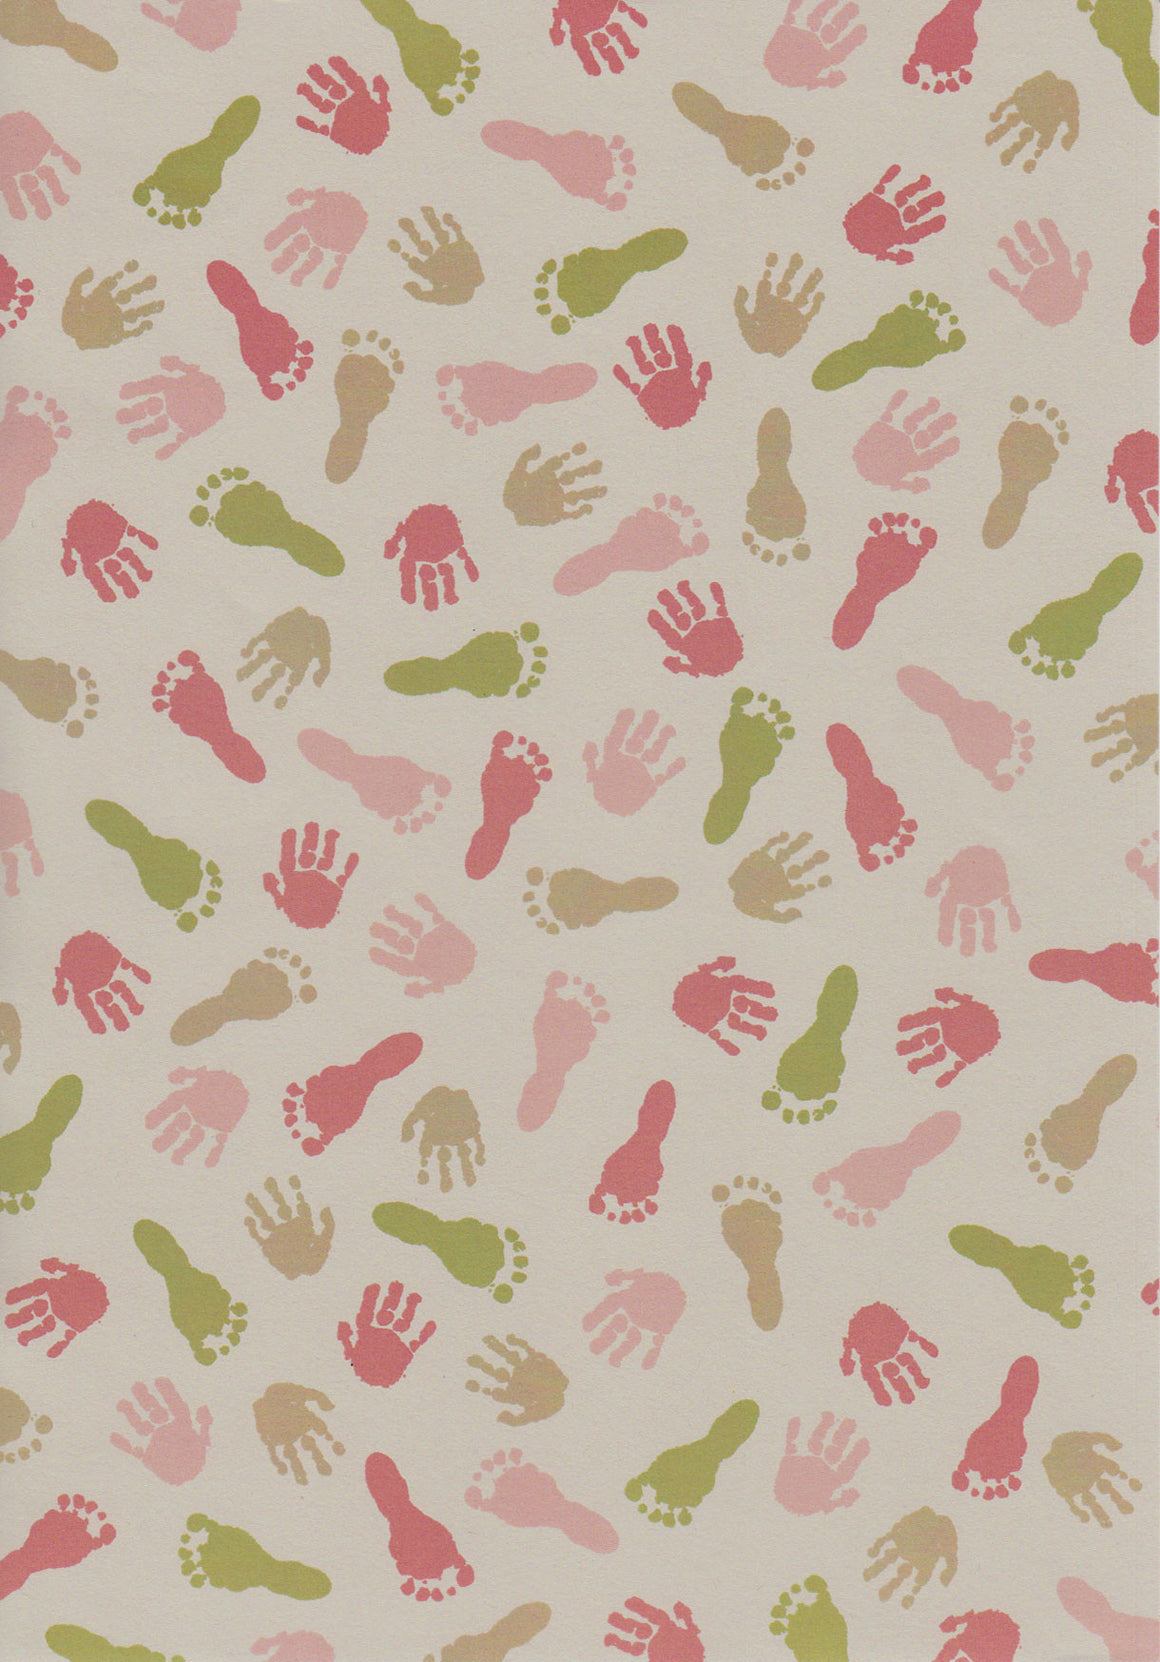 Children hand and feet imprints on paper